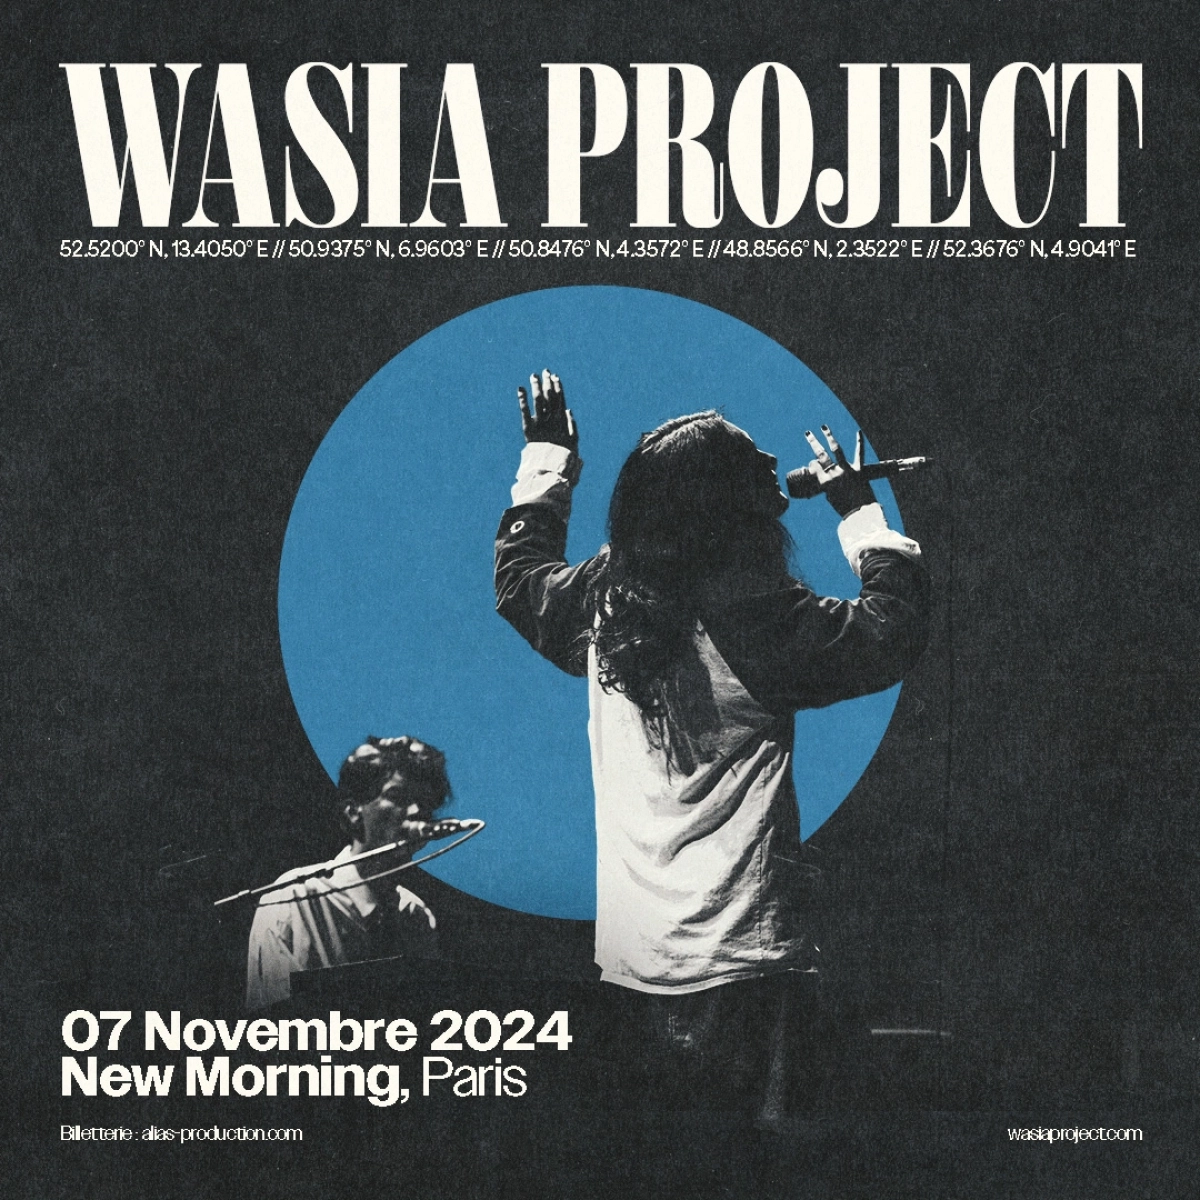 Wasia Project at New Morning Tickets